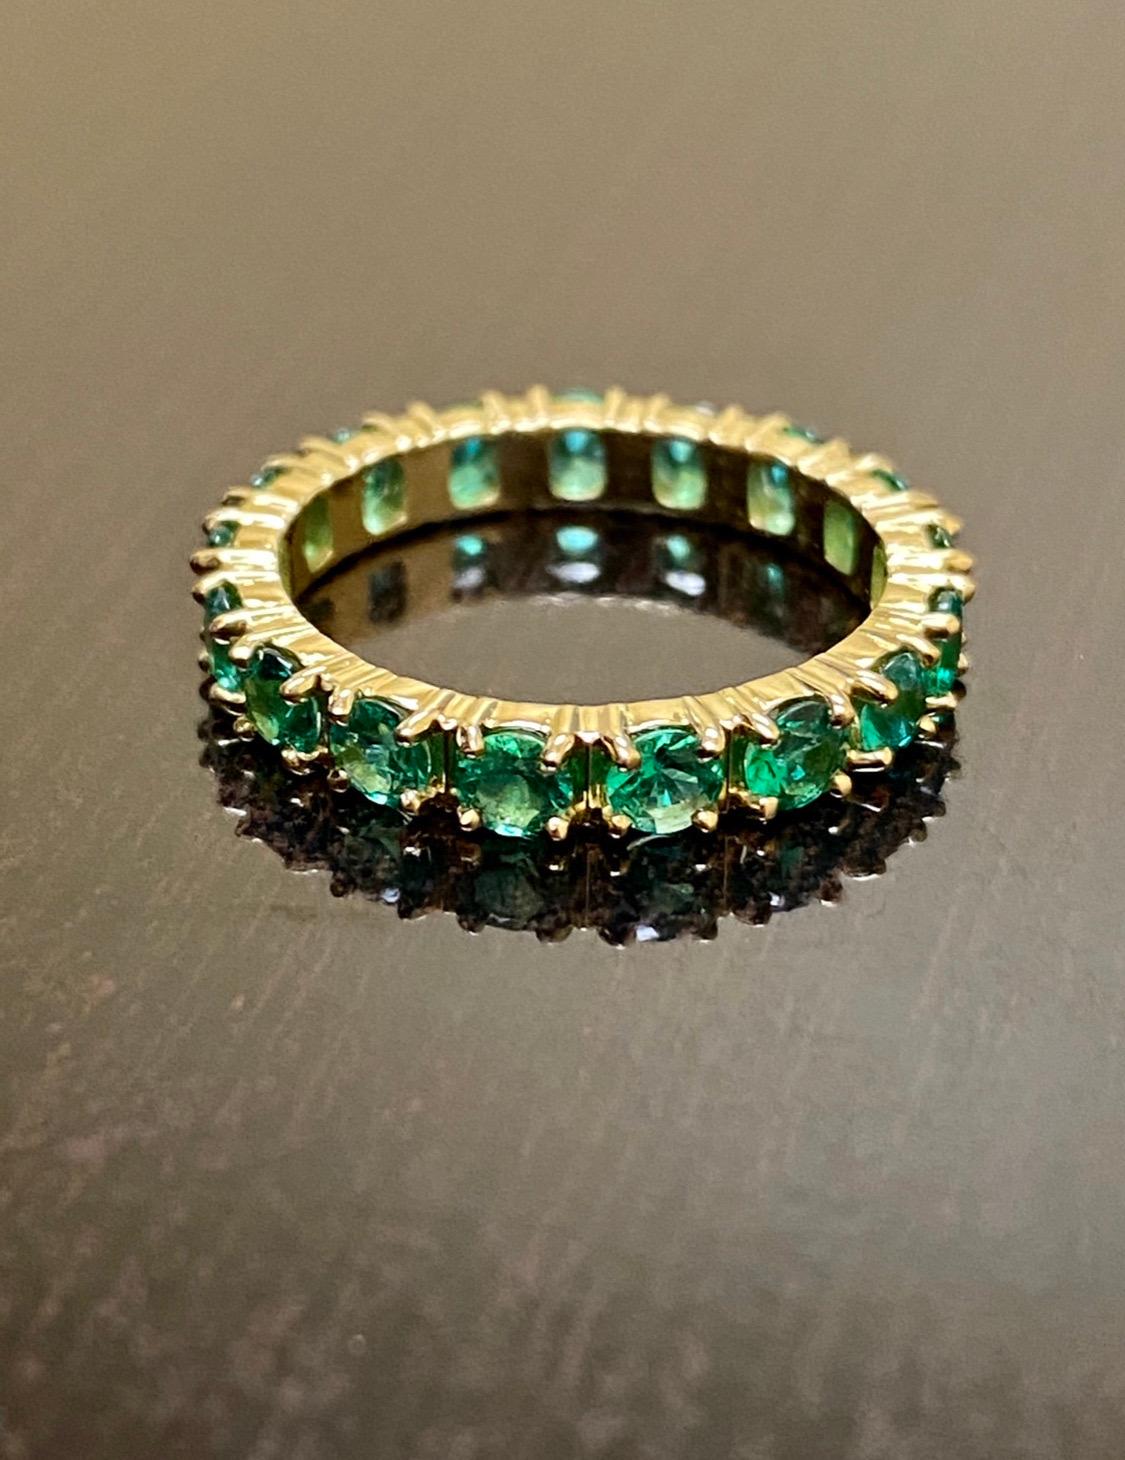 DeKara Designs Collection

Metal- 18K Yellow Gold, .750.

Stones- Genuine Round Emeralds, 3 MM Each, 1.60-1.80 Carats. Carat weight depends on finger size.

Handmade Gorgeous Genuine Emerald Eternity Engagement Band Created in 18K Yellow Gold. This